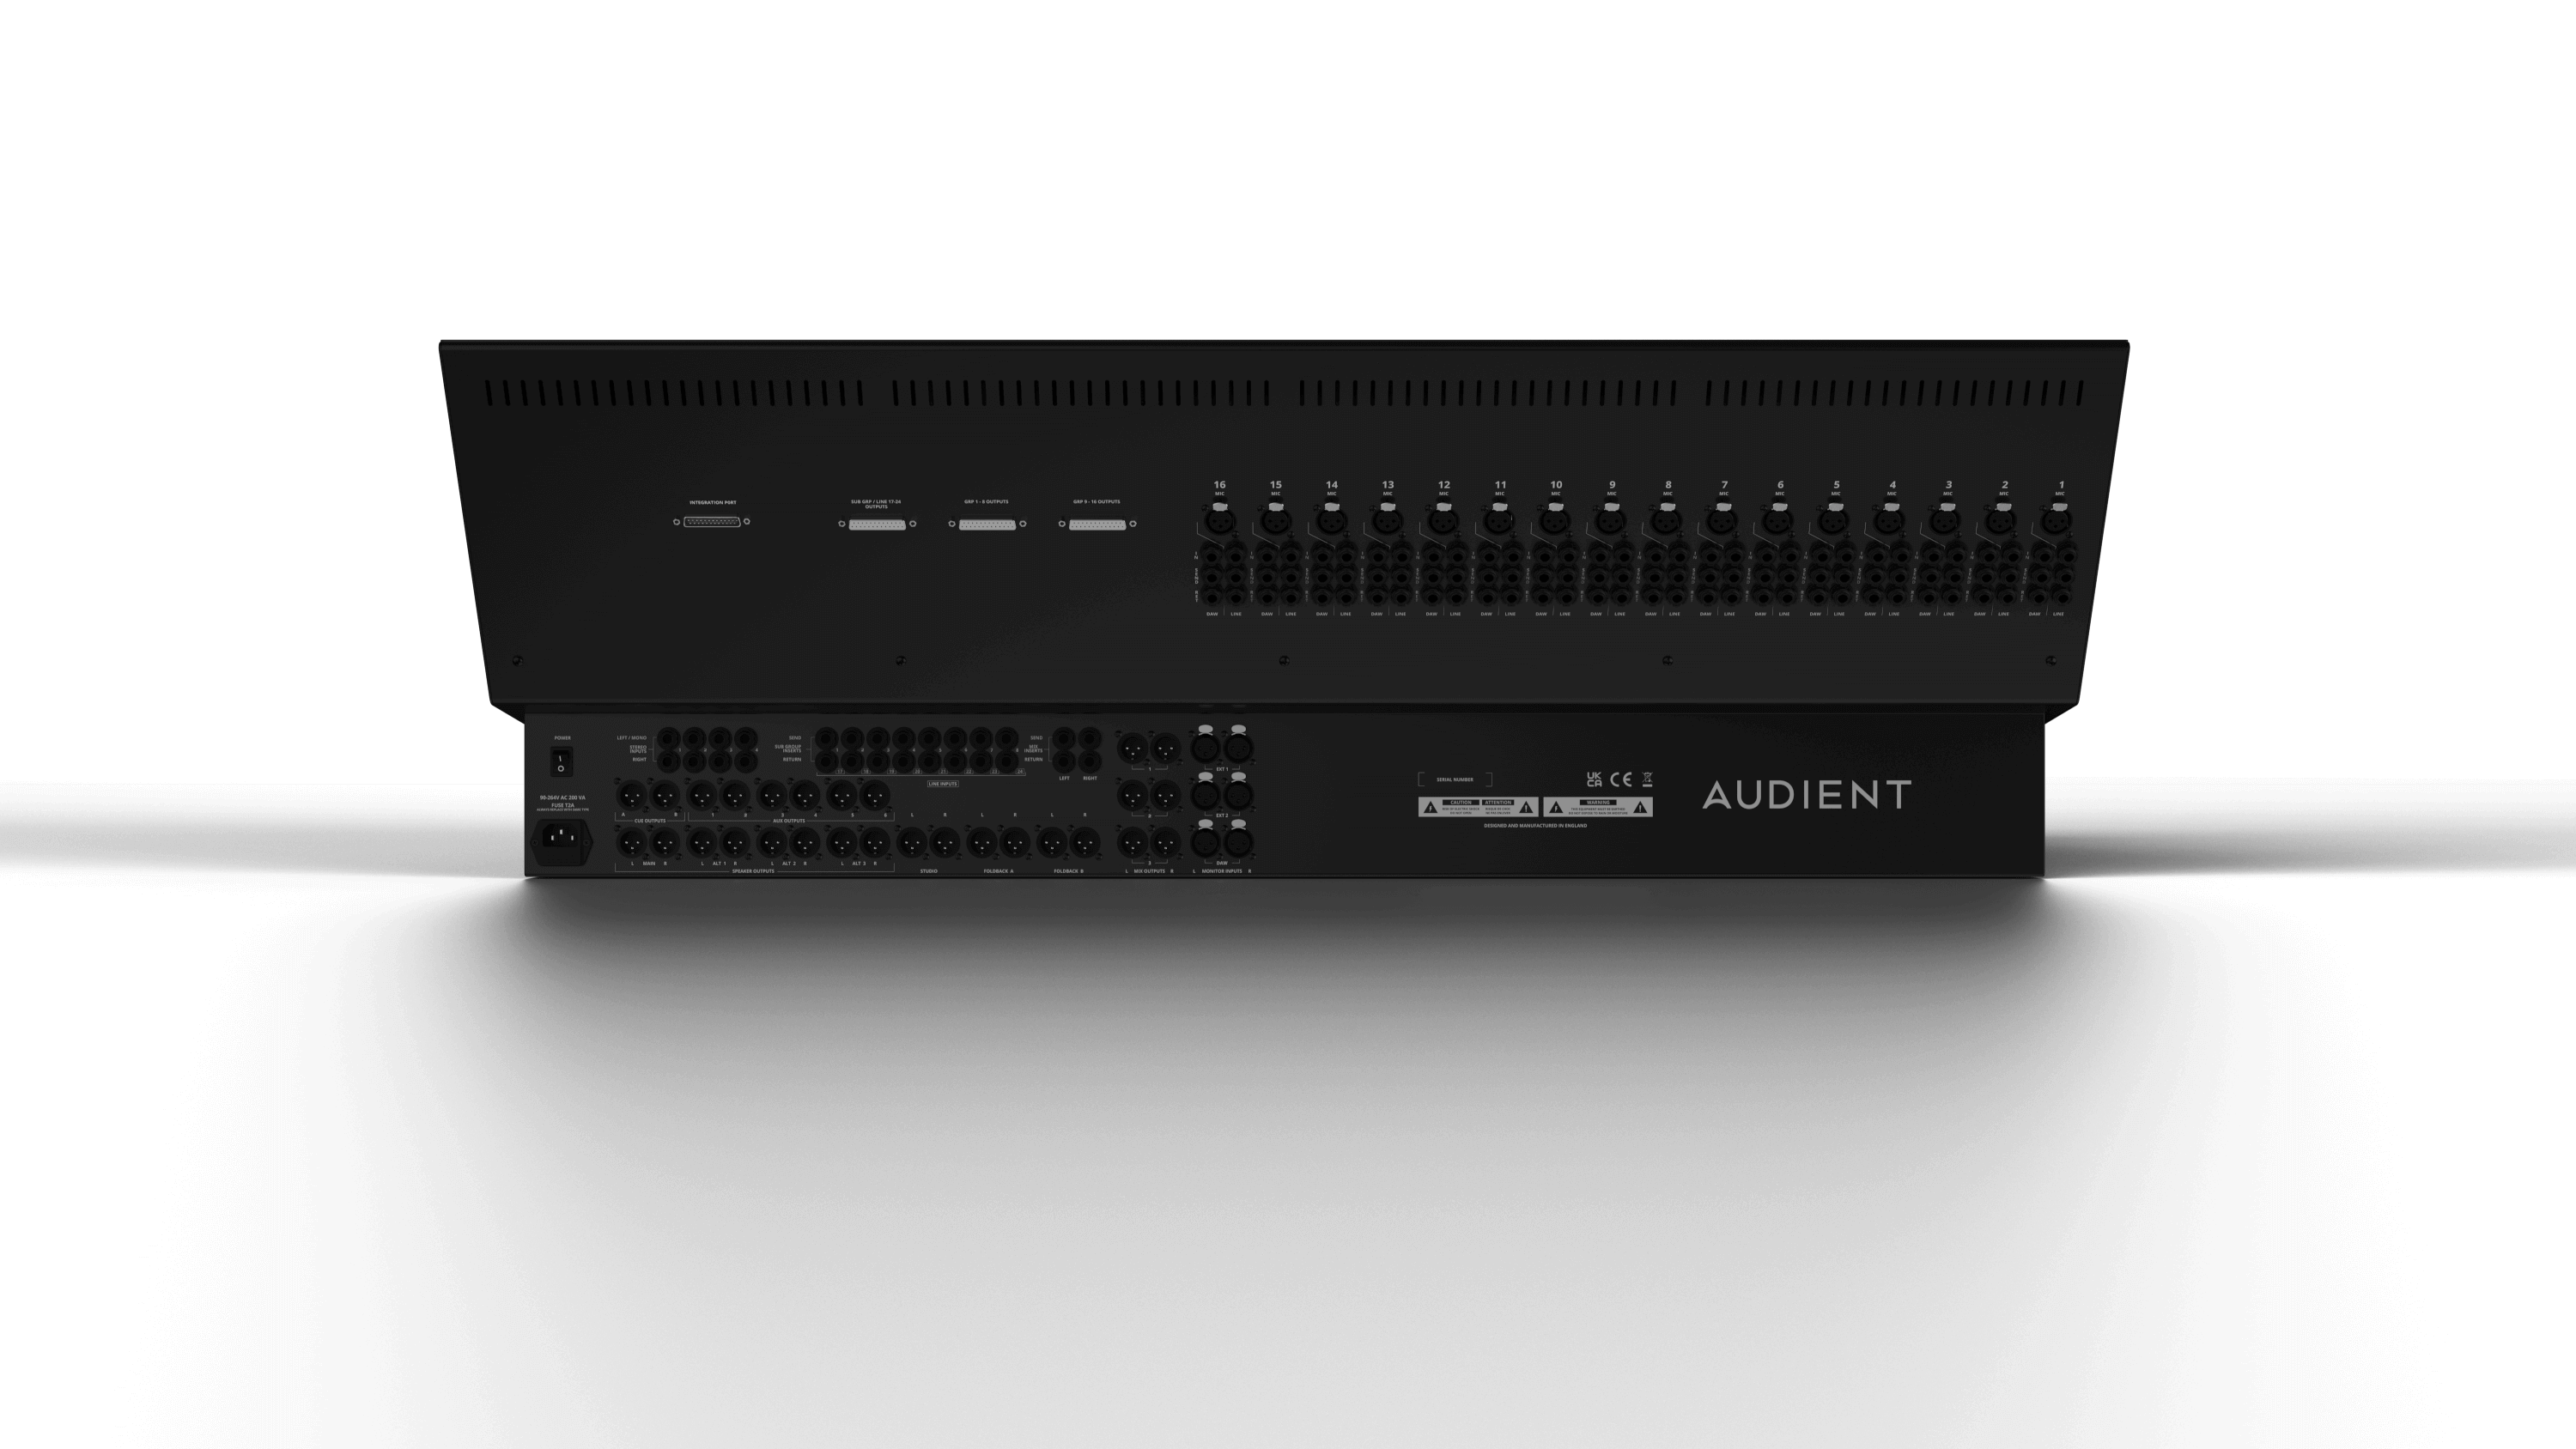 Back view of audio mixing console - ASP4816 now shipping